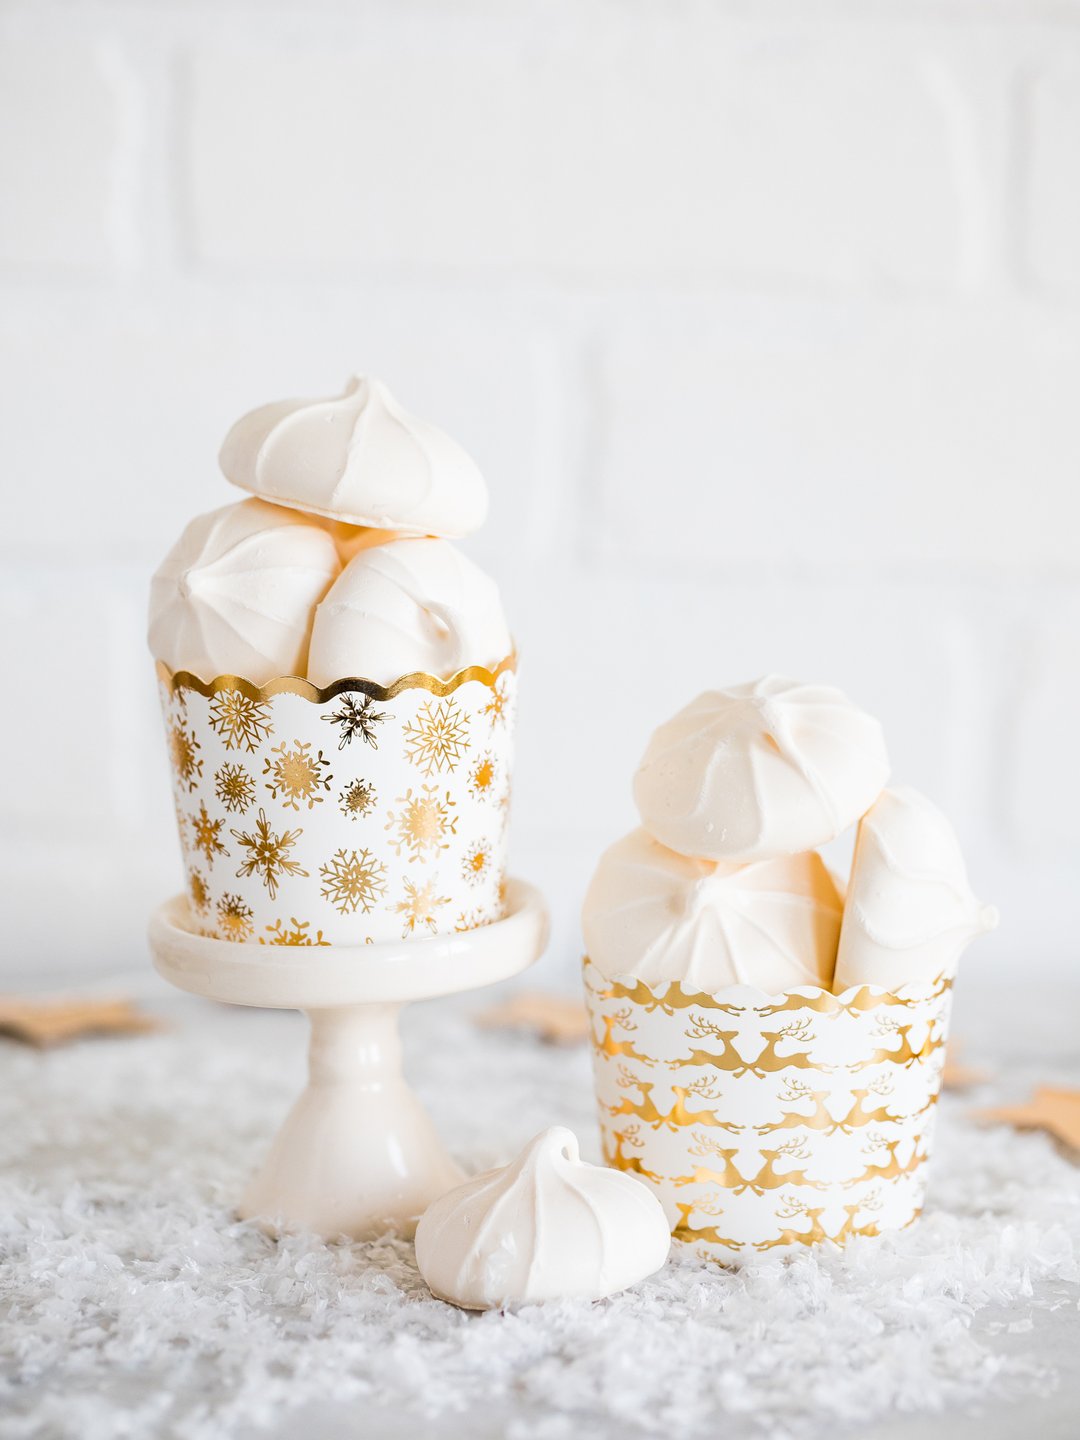 A gold foil and reindeer festive baking cup on a small cupcake plate with festive baked goods inside one a snow sprinkled table